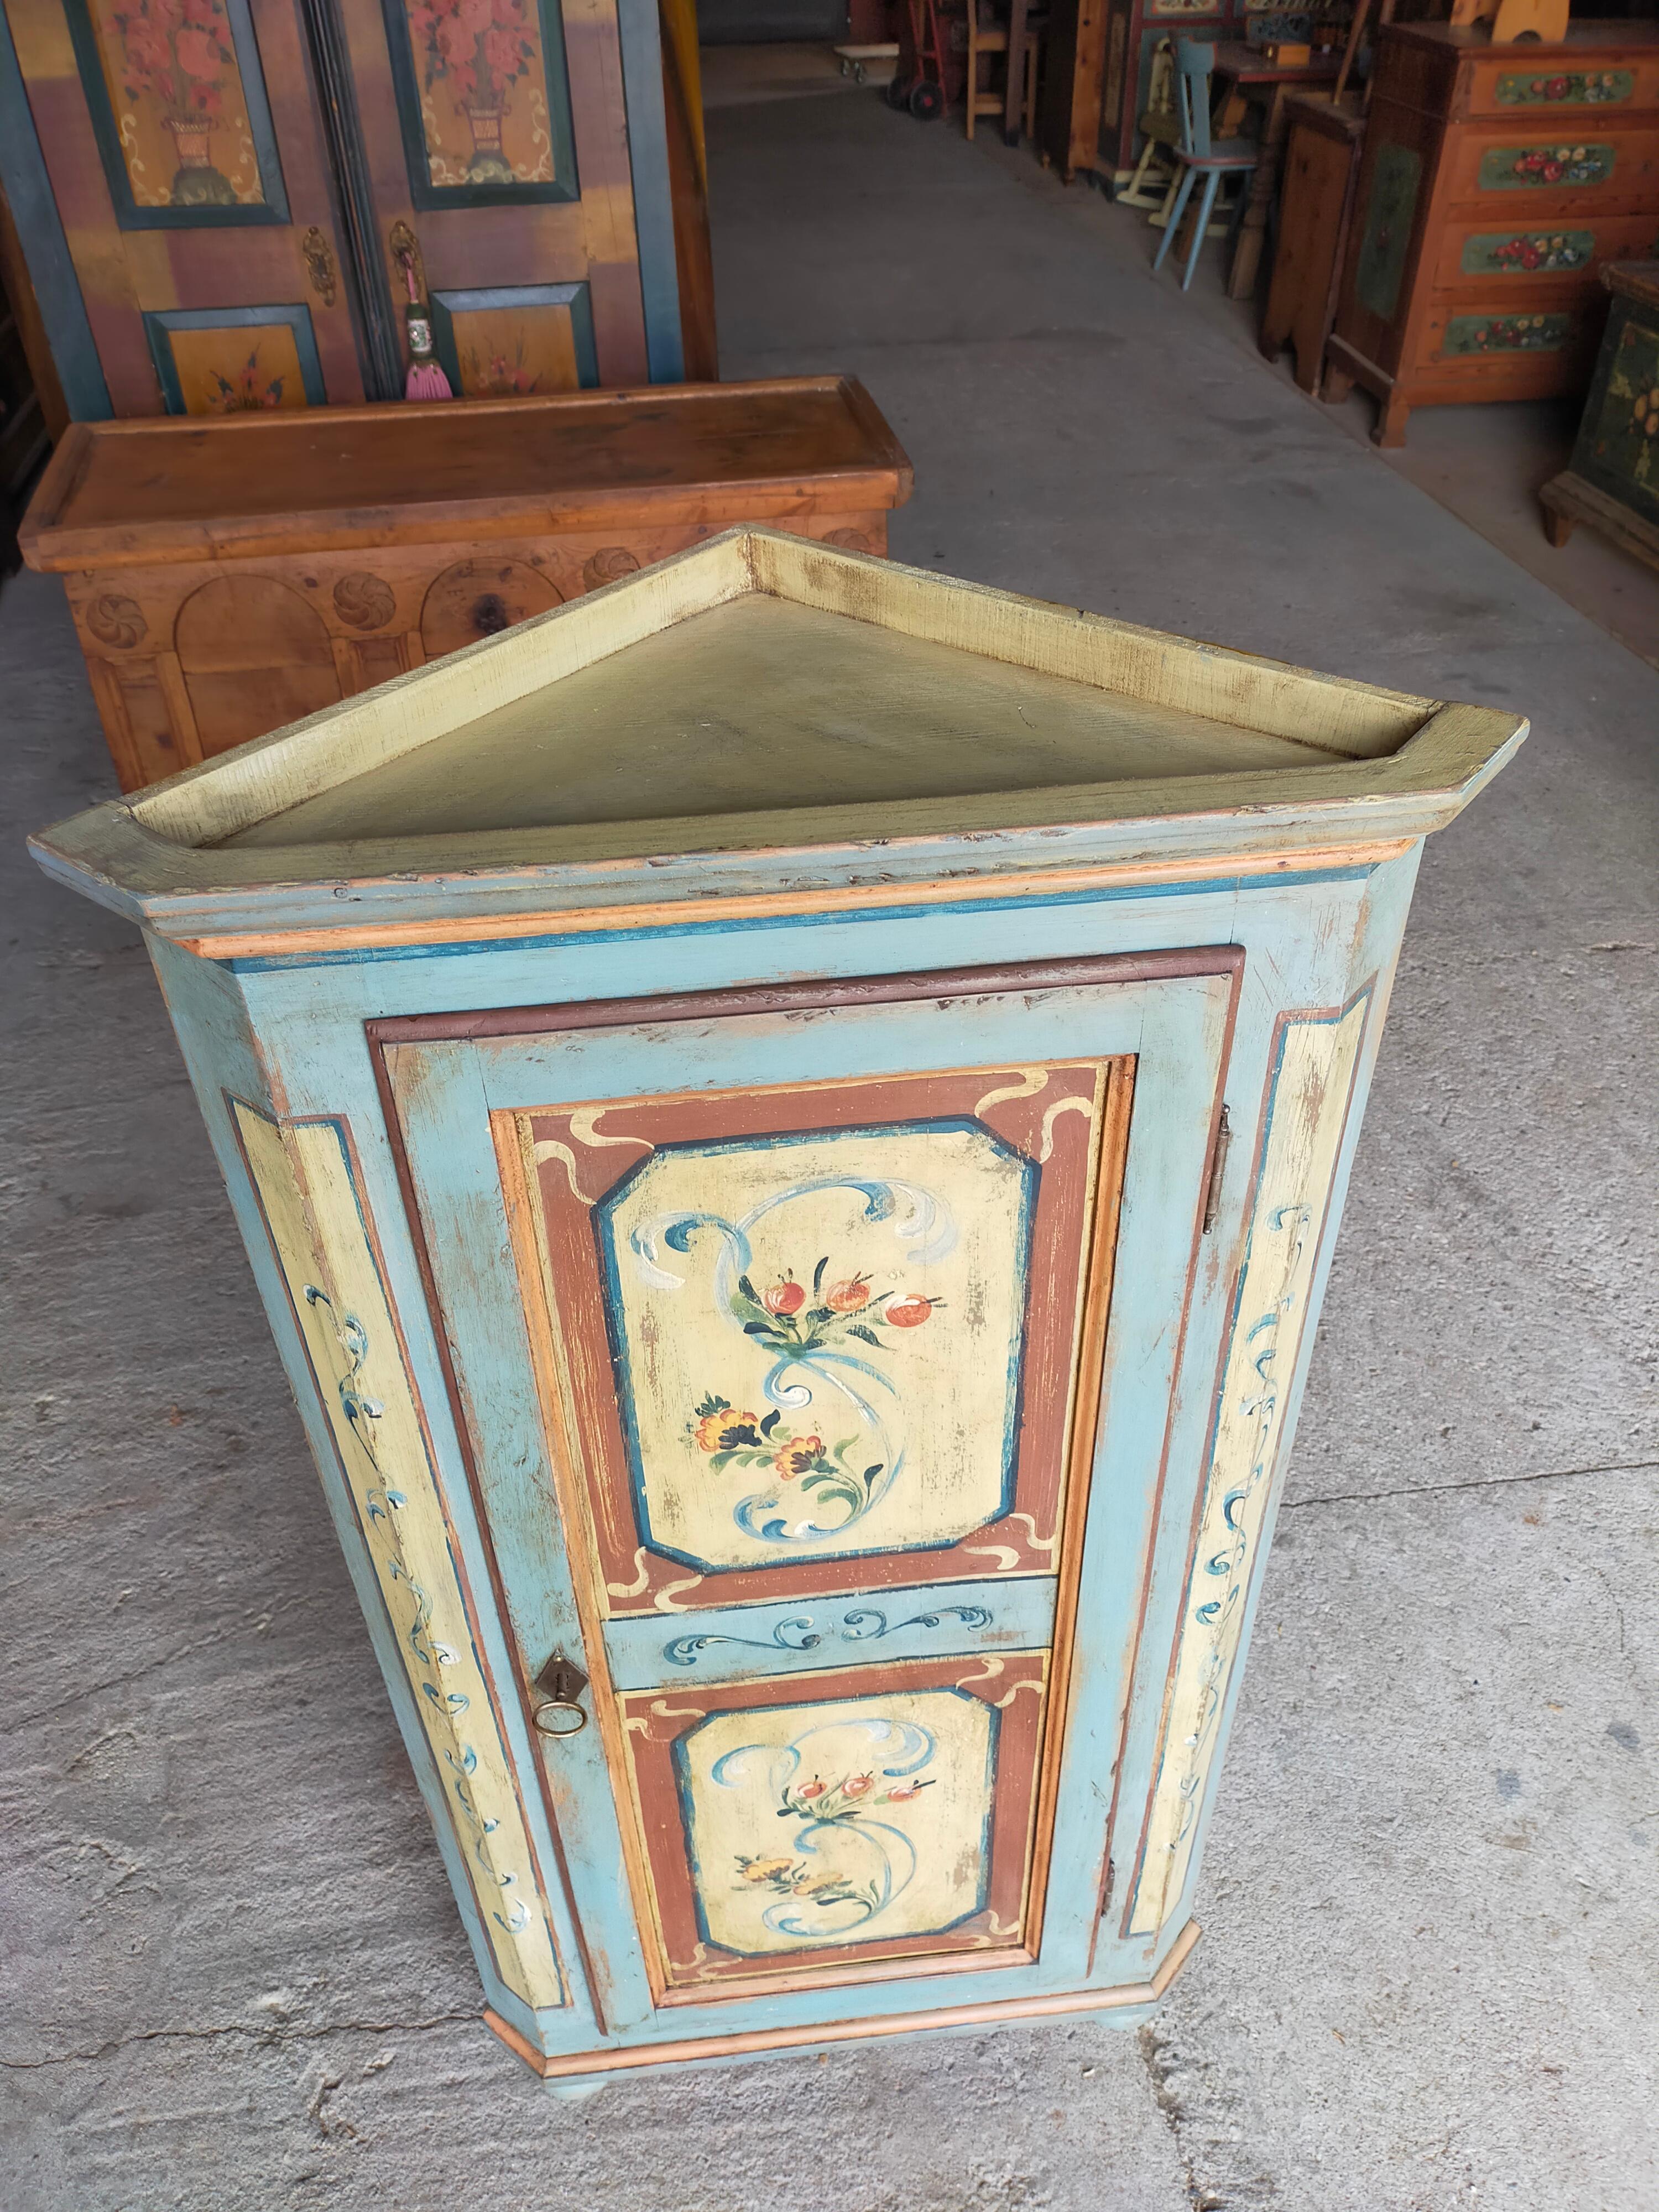 Spruce corner cabinet from the early 1900s. 
With two interior shelves.
Door painted with floral motifs, with secret visible in photo.

Other photos or information at customer's request.